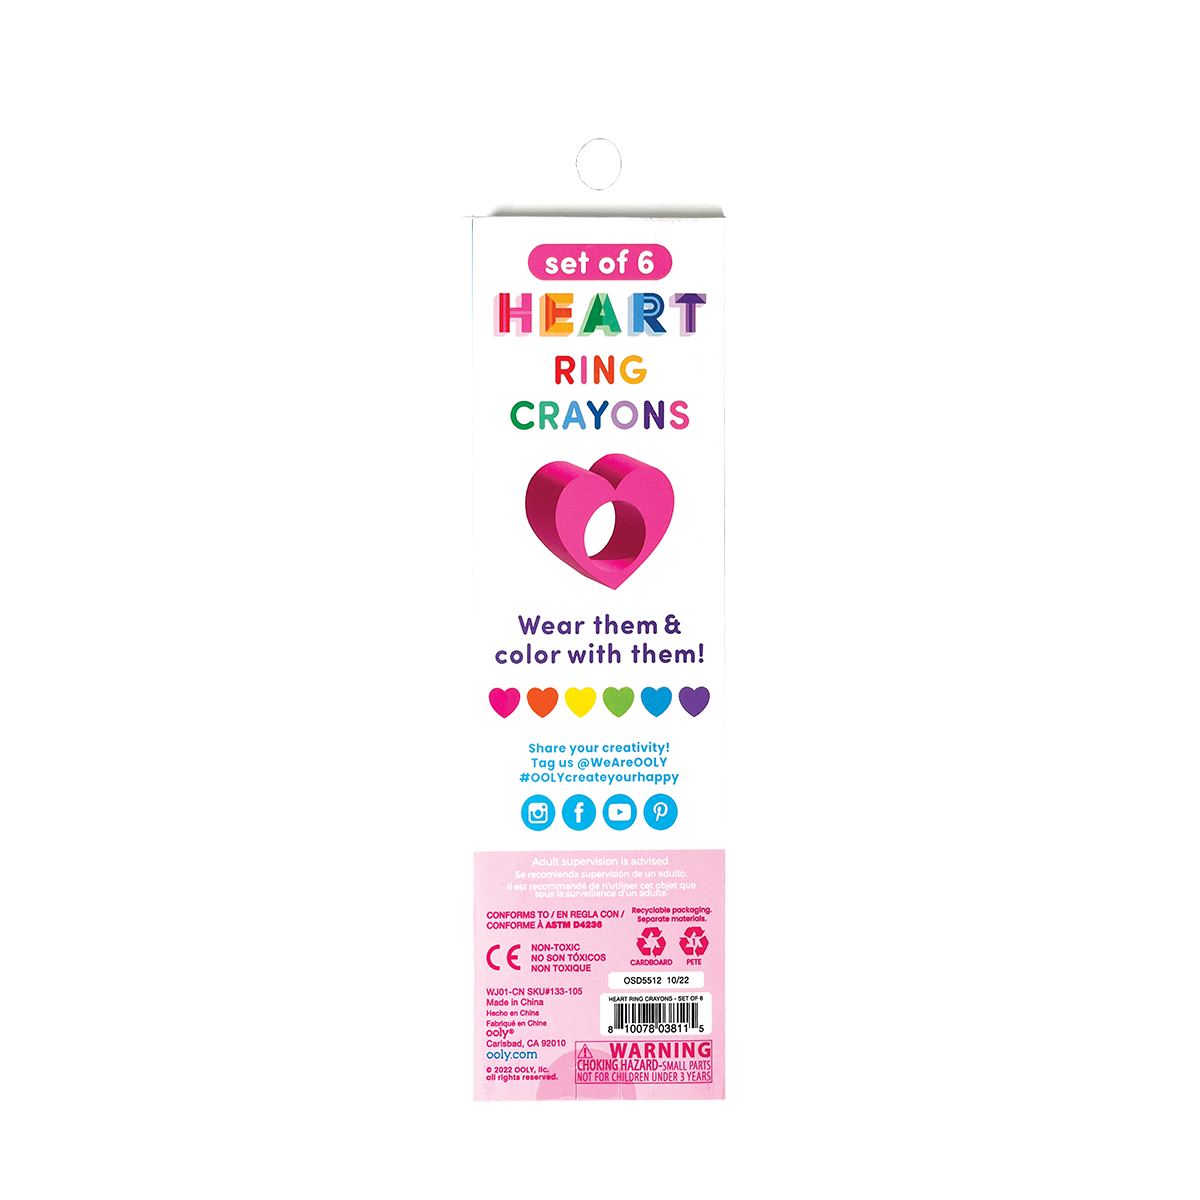 OOLY Heart Ring Crayons back side of packaging